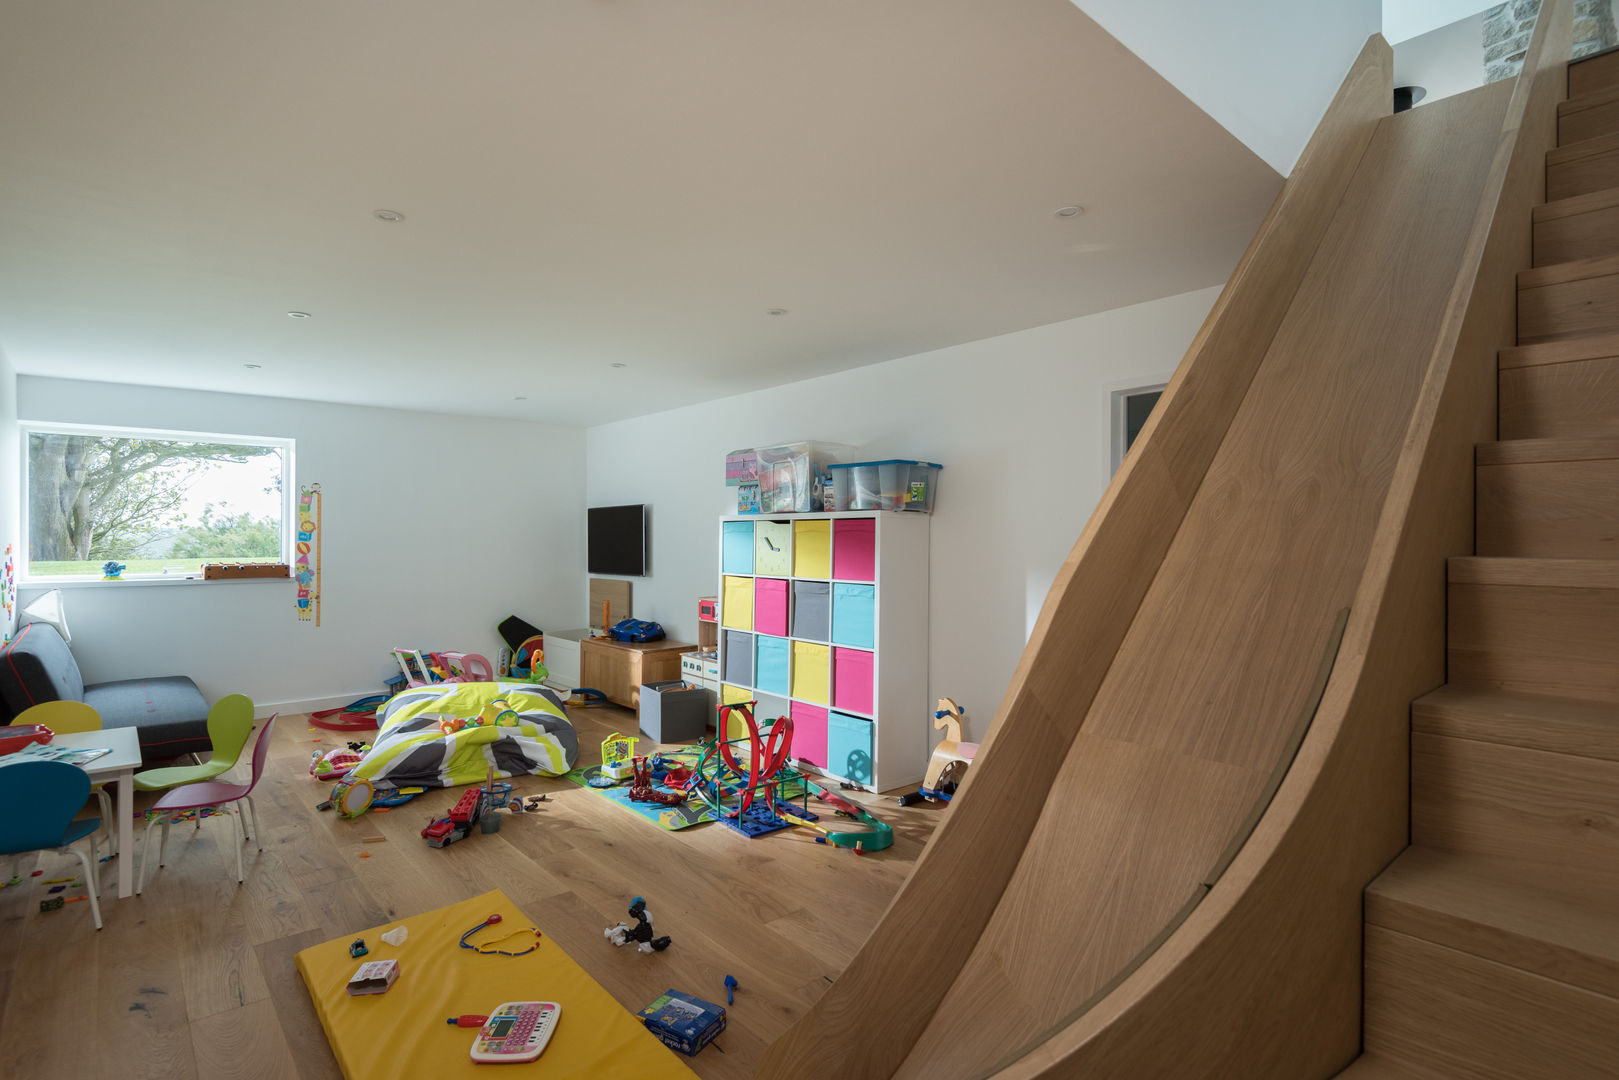 Contemporary Replacement Dwelling, Cubert, Laurence Associates Laurence Associates Dormitorios infantiles play room,game room,internal slide,fun,games,storage,children,toys,modular storage,bright colours,play,kids room